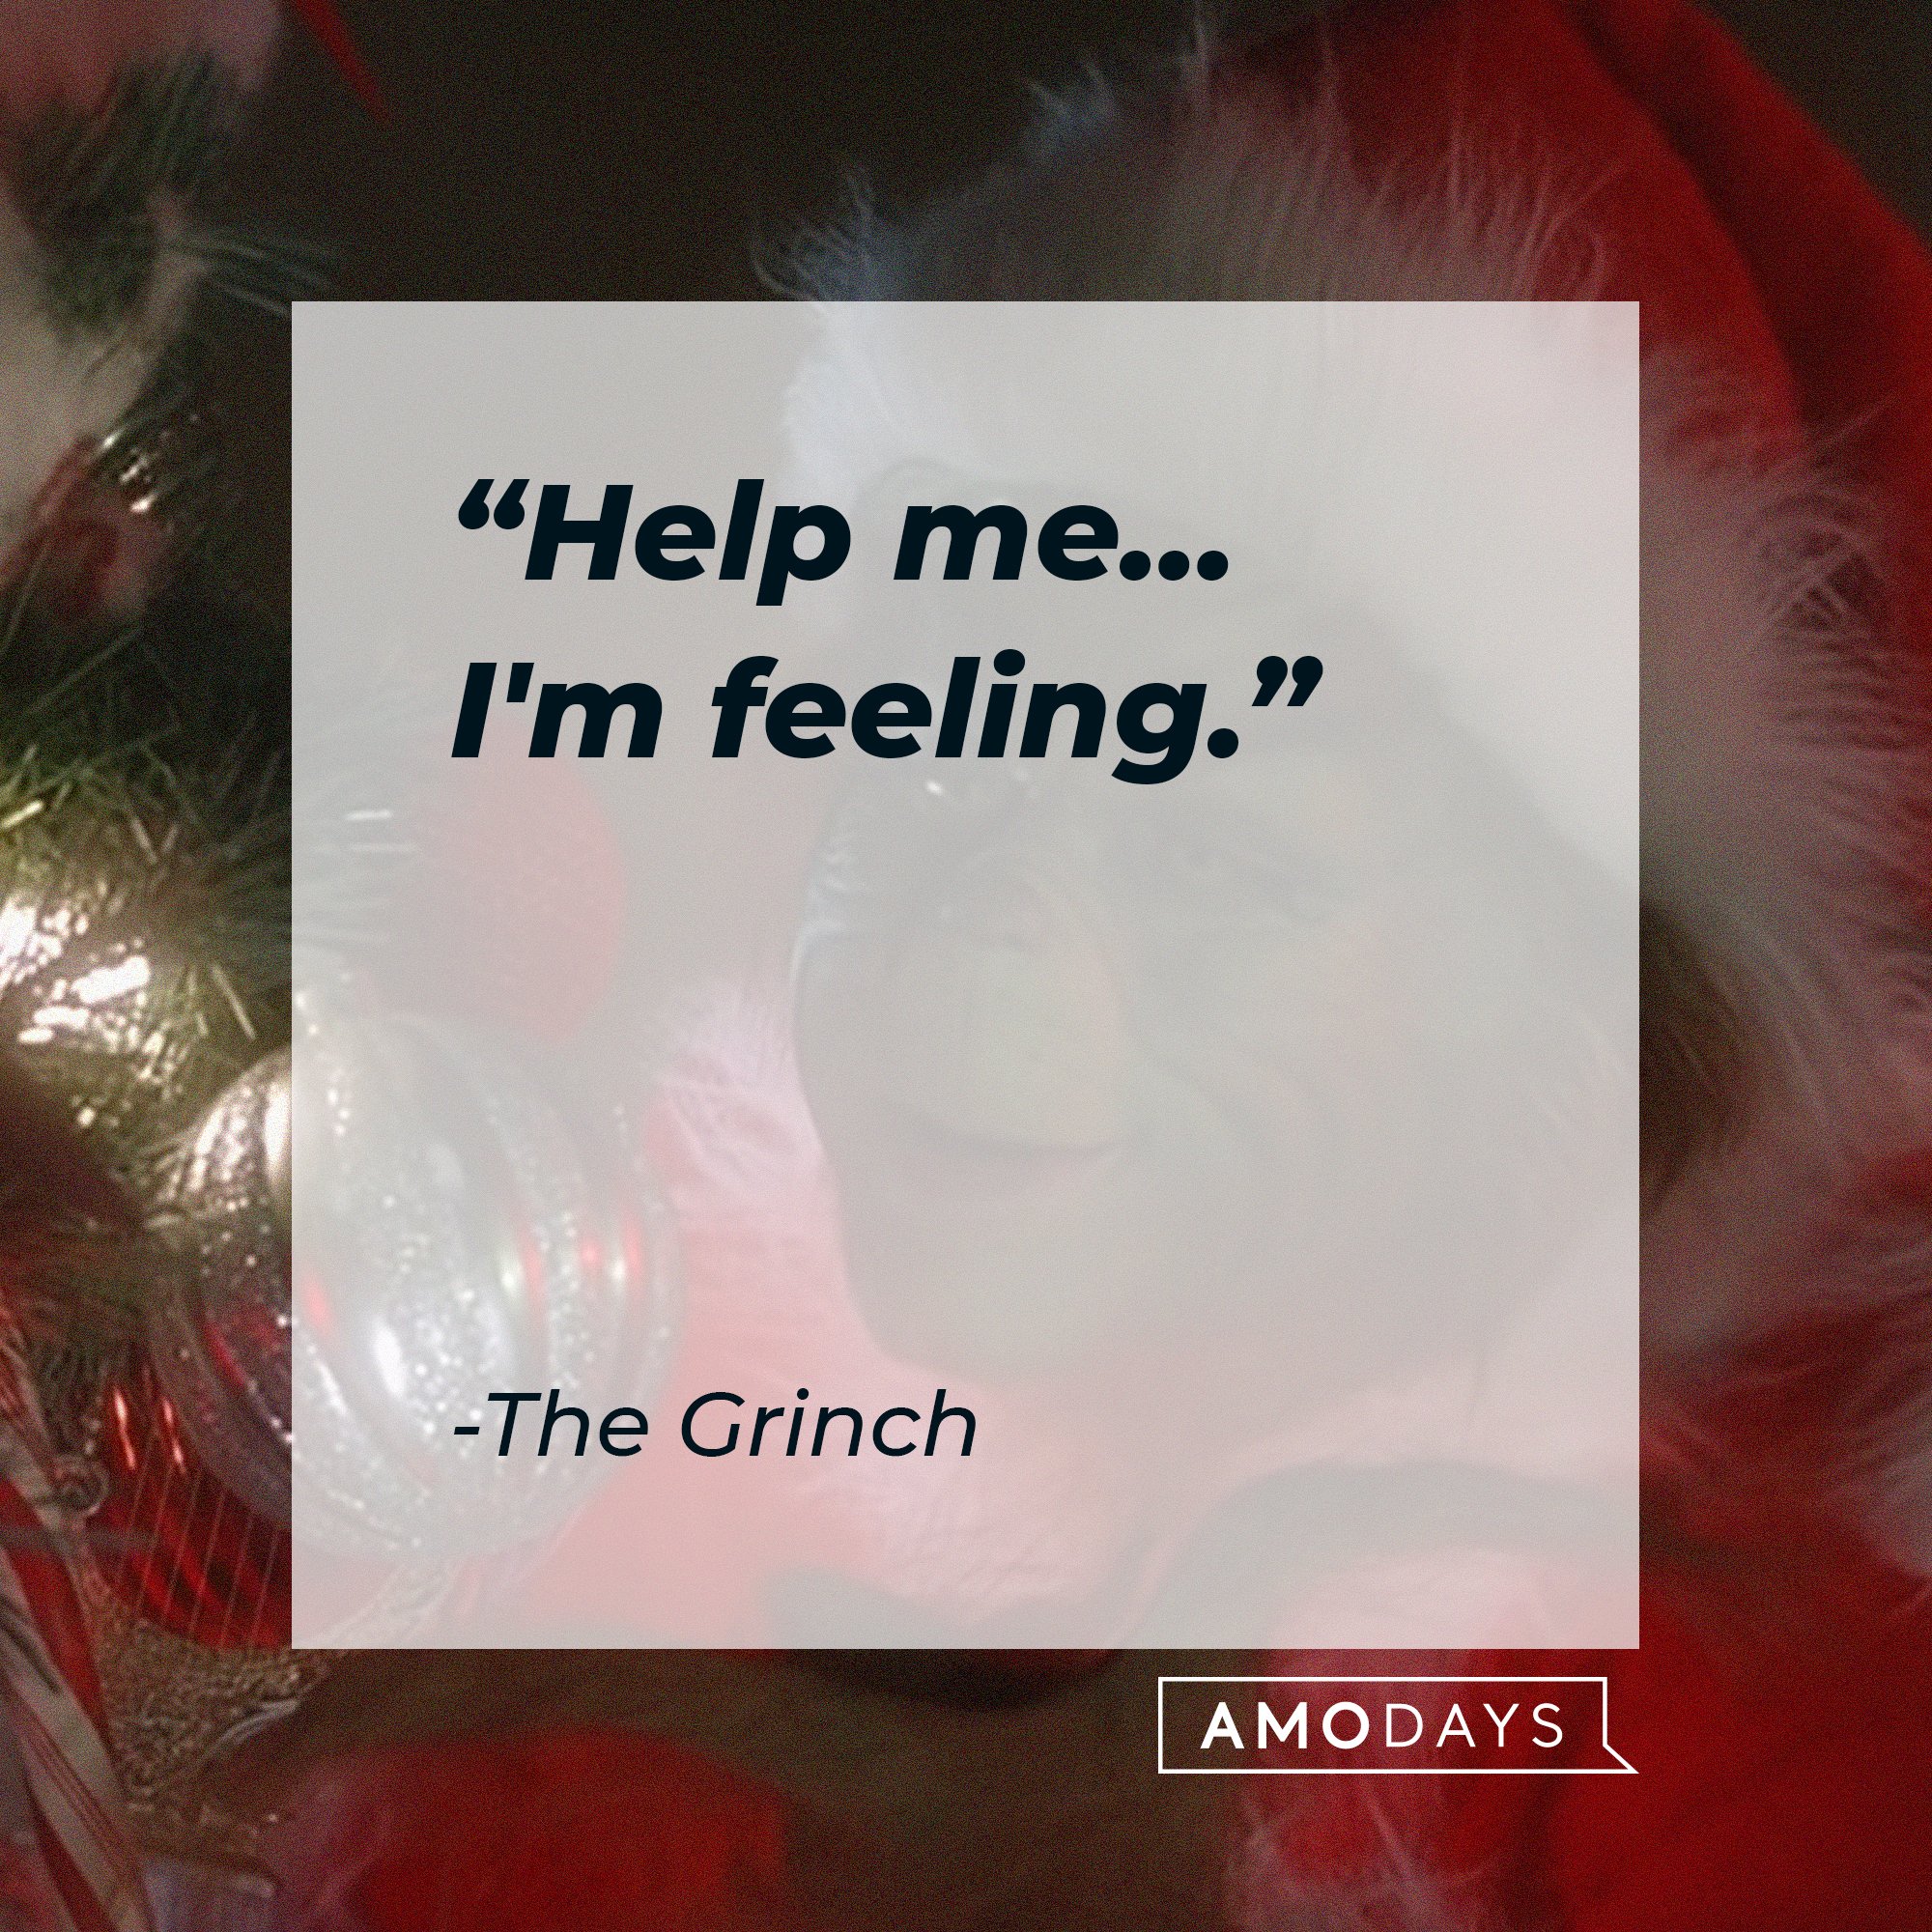 The Grinch's quote: "Help me… I'm feeling." | Image: AmoDays